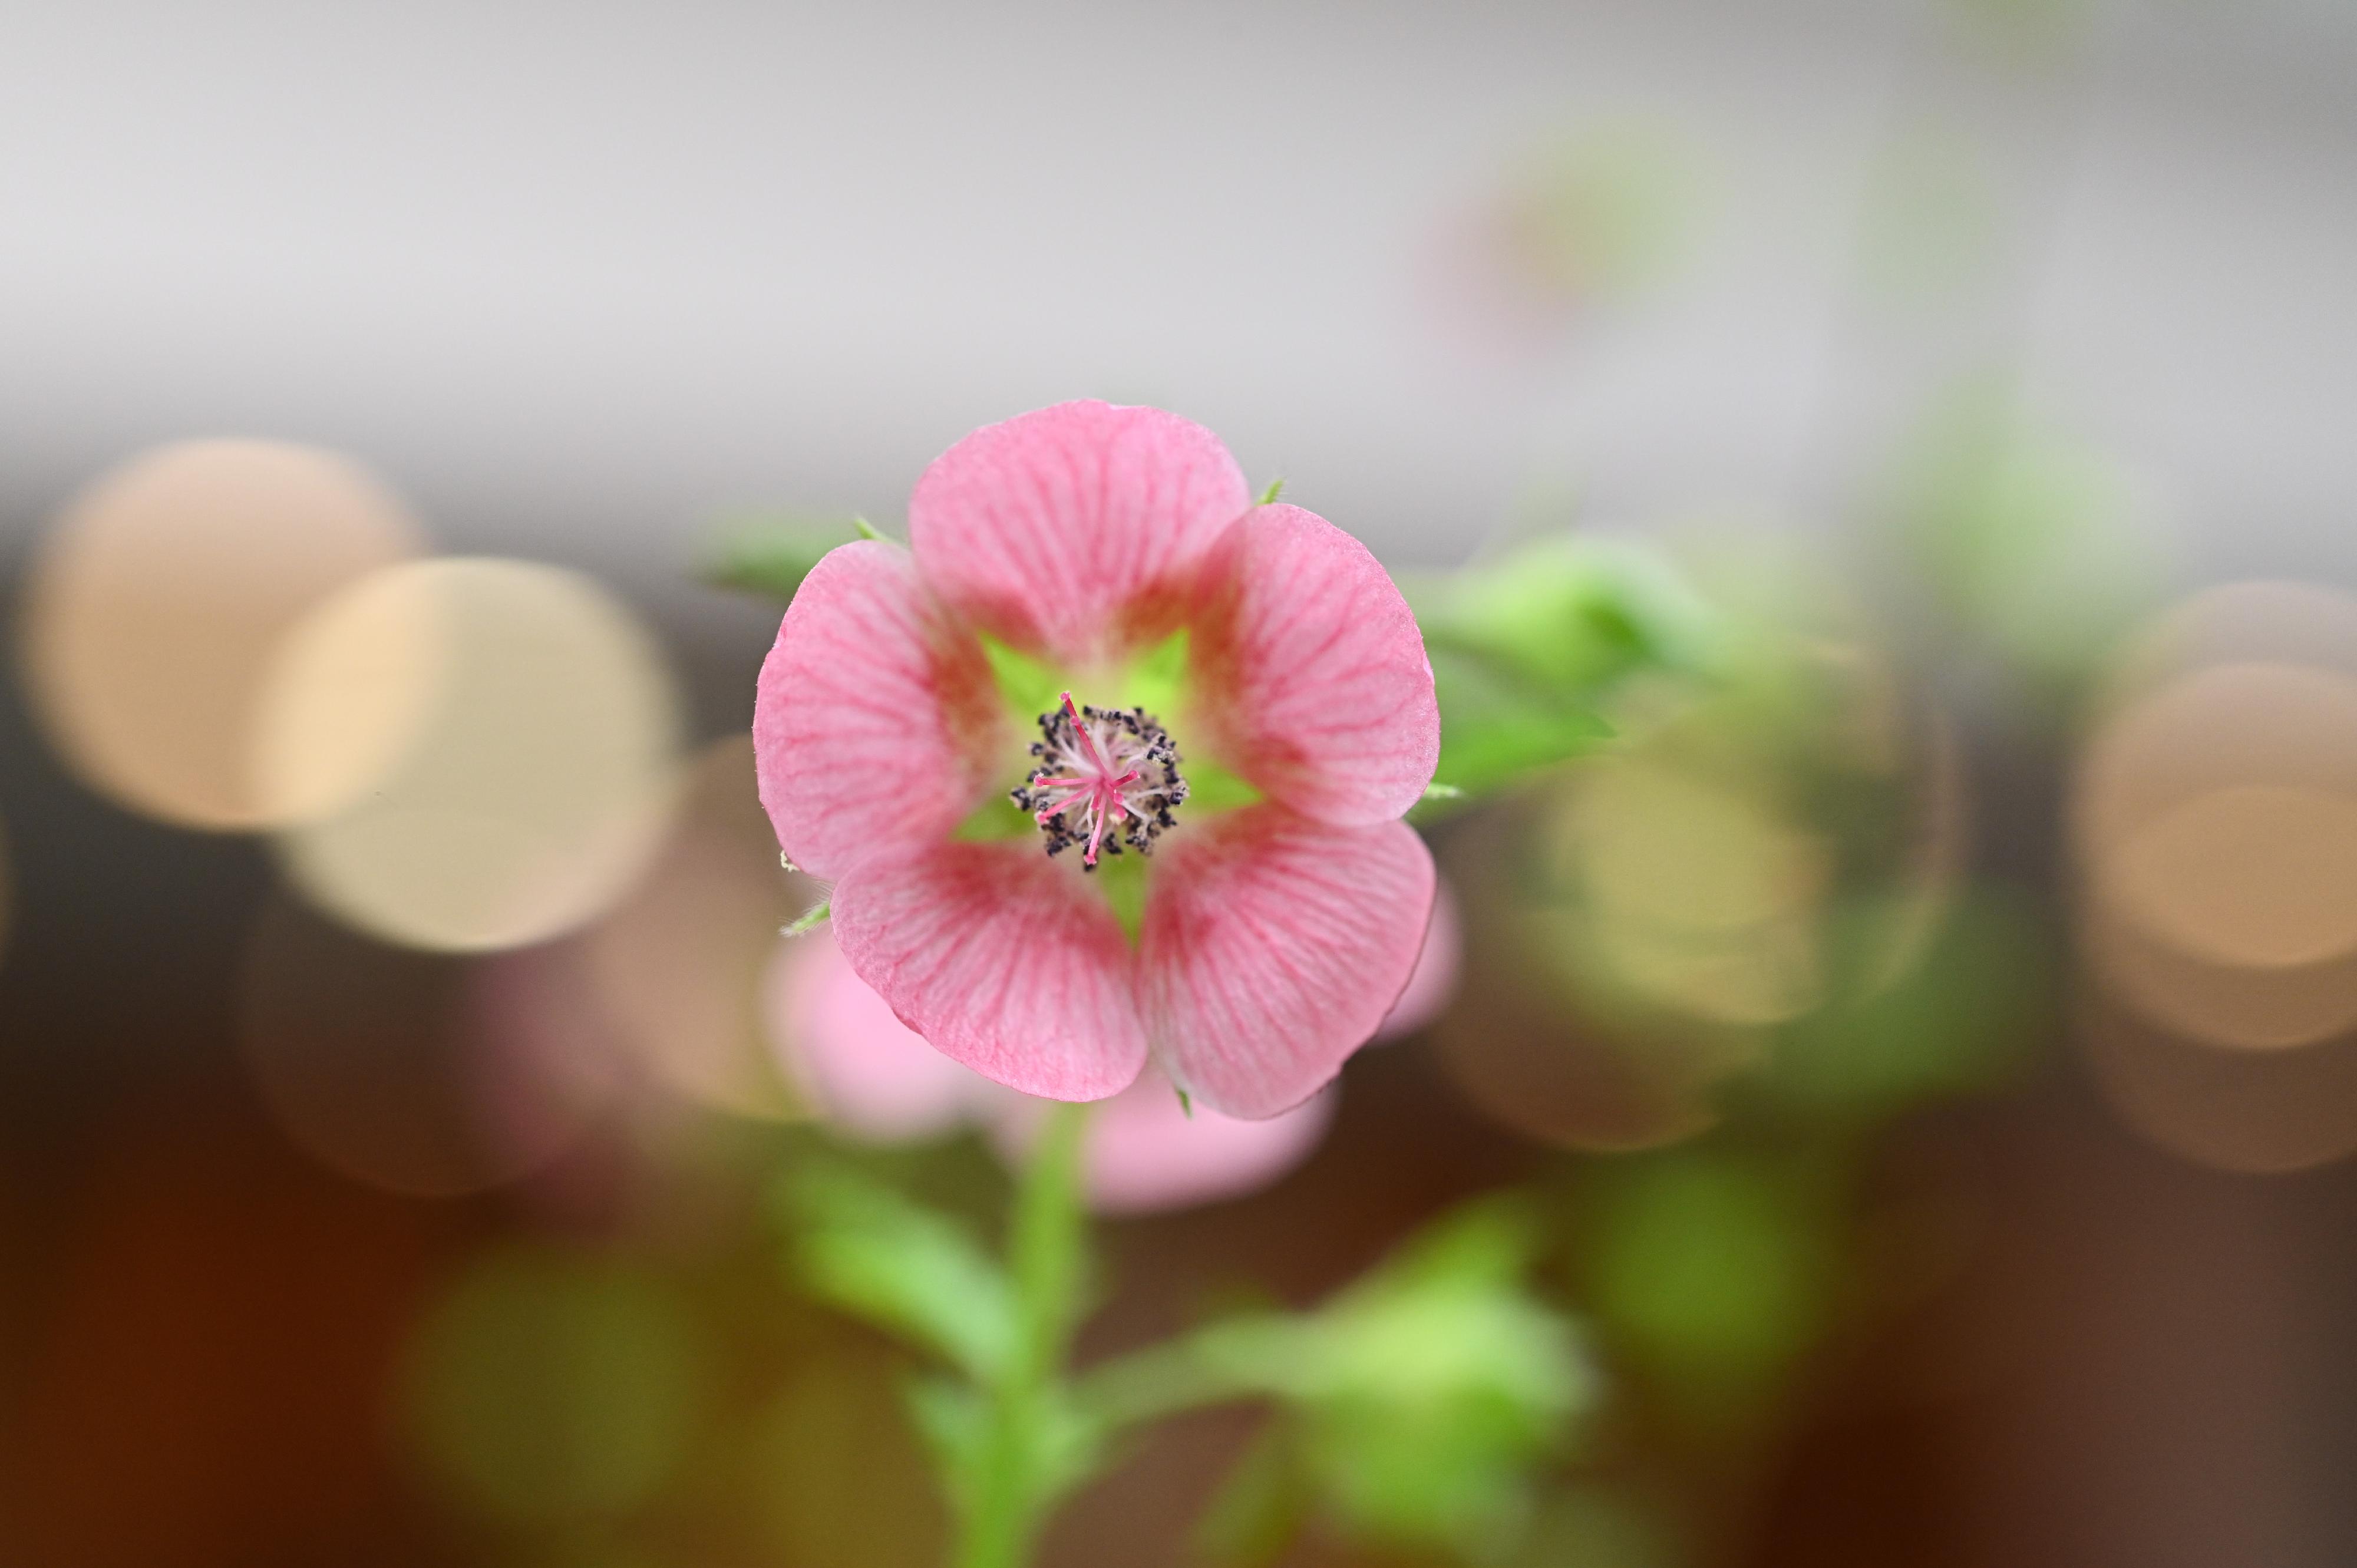 Starting from April 22, a rich variety of about 500 edible flowers and herbs for springtime will be displayed at an exhibition to be held at the Forsgate Conservatory in Hong Kong Park managed by the Leisure and Cultural Services Department. Photo shows an African Mallow in the exhibition.